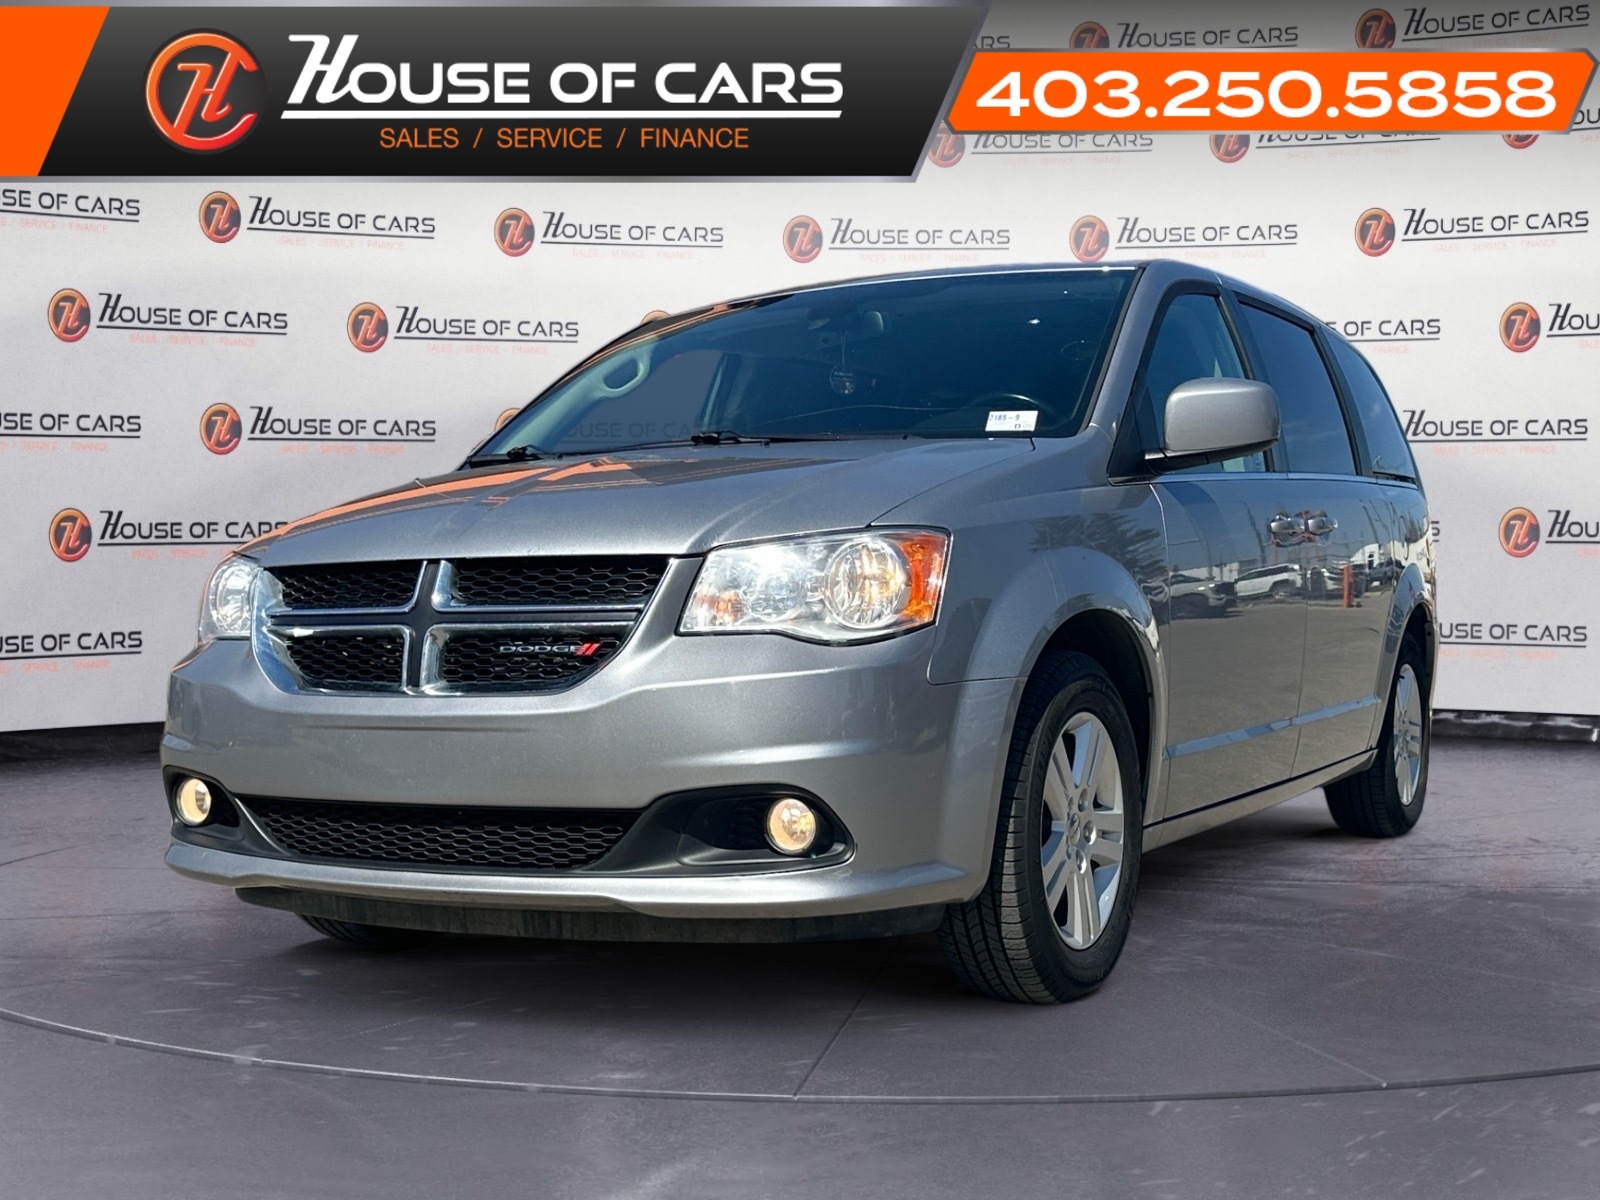 2019 Dodge Grand Caravan Crew Plus 2WD WITH/ HEATED SEATS AND STEERING